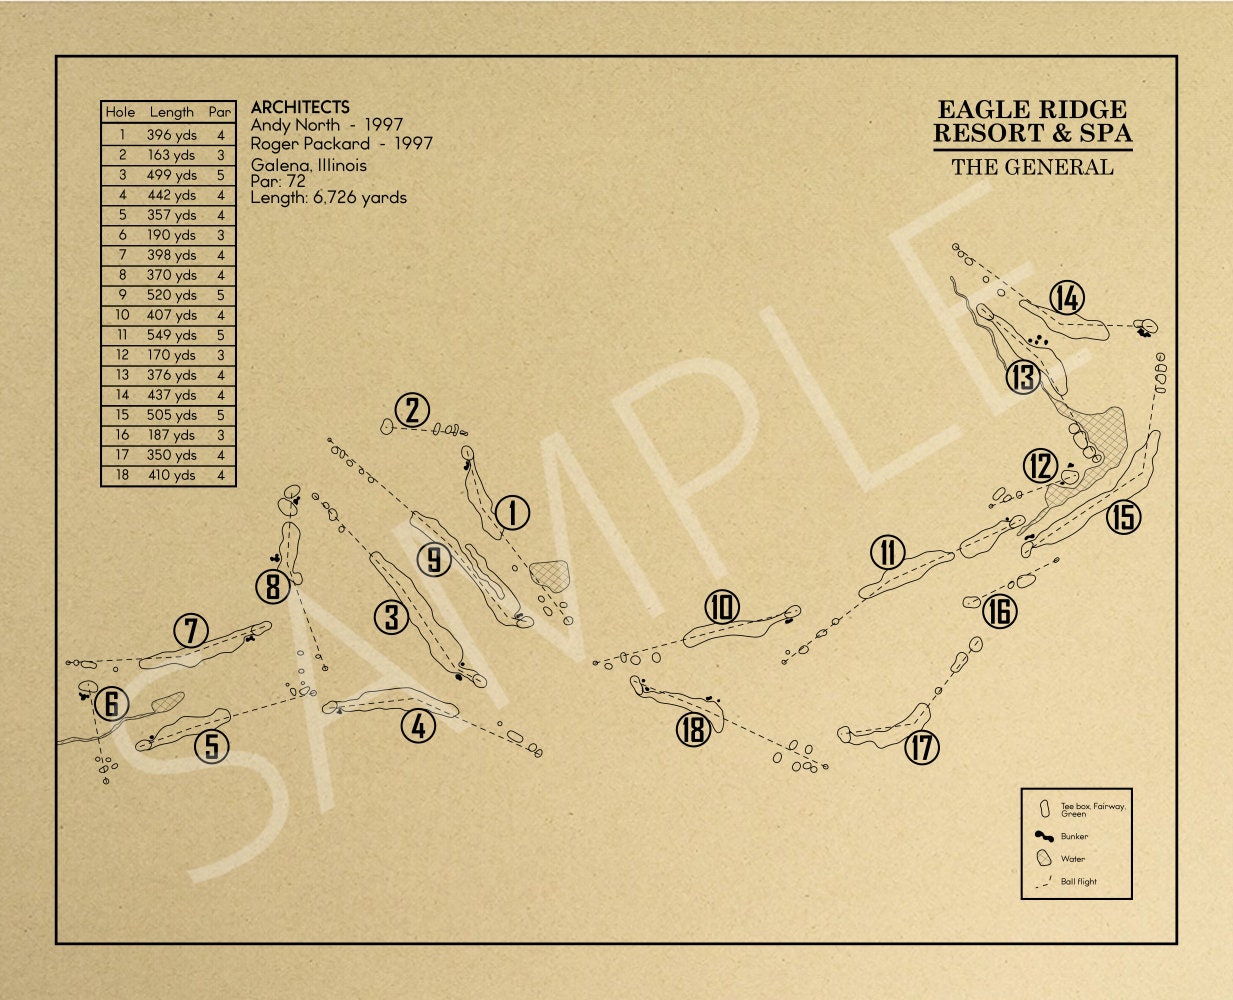 The General Course at Eagle Ridge Resort & Spa Outline (Print)